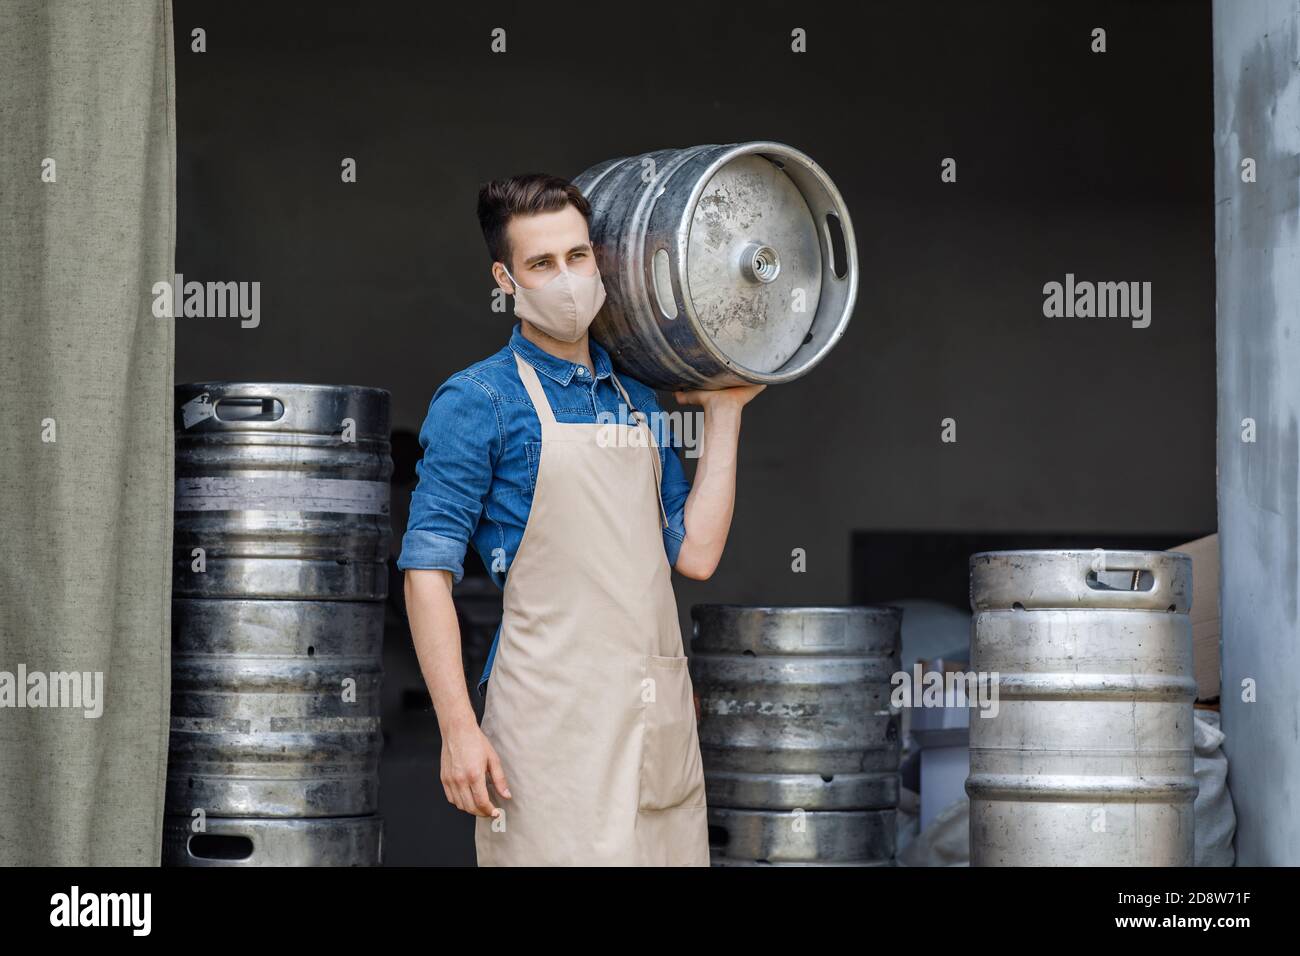 Work at brewery during coronavirus pandemic and industrial craft beer plant Stock Photo